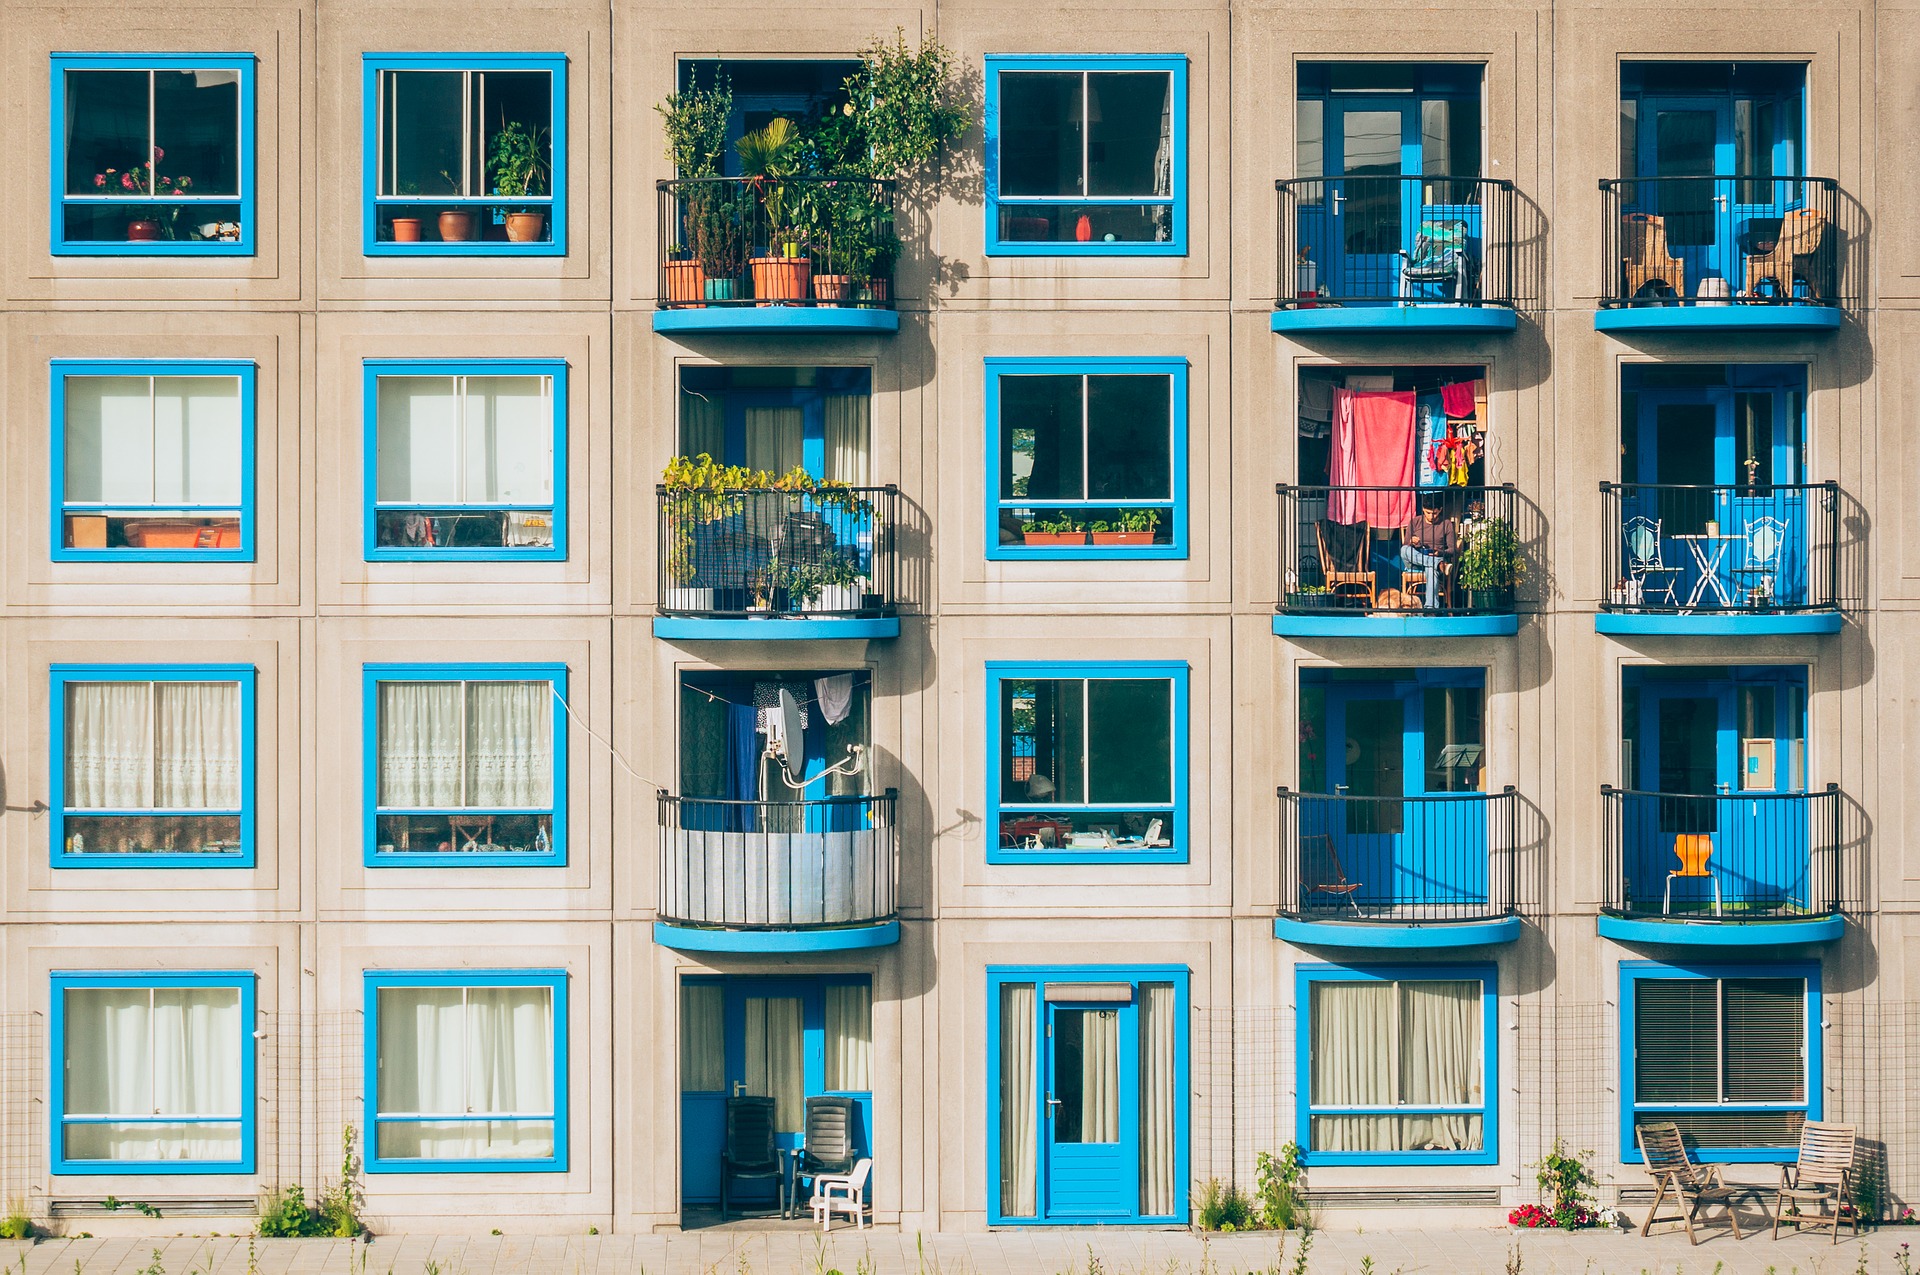 Apartments with blue trim